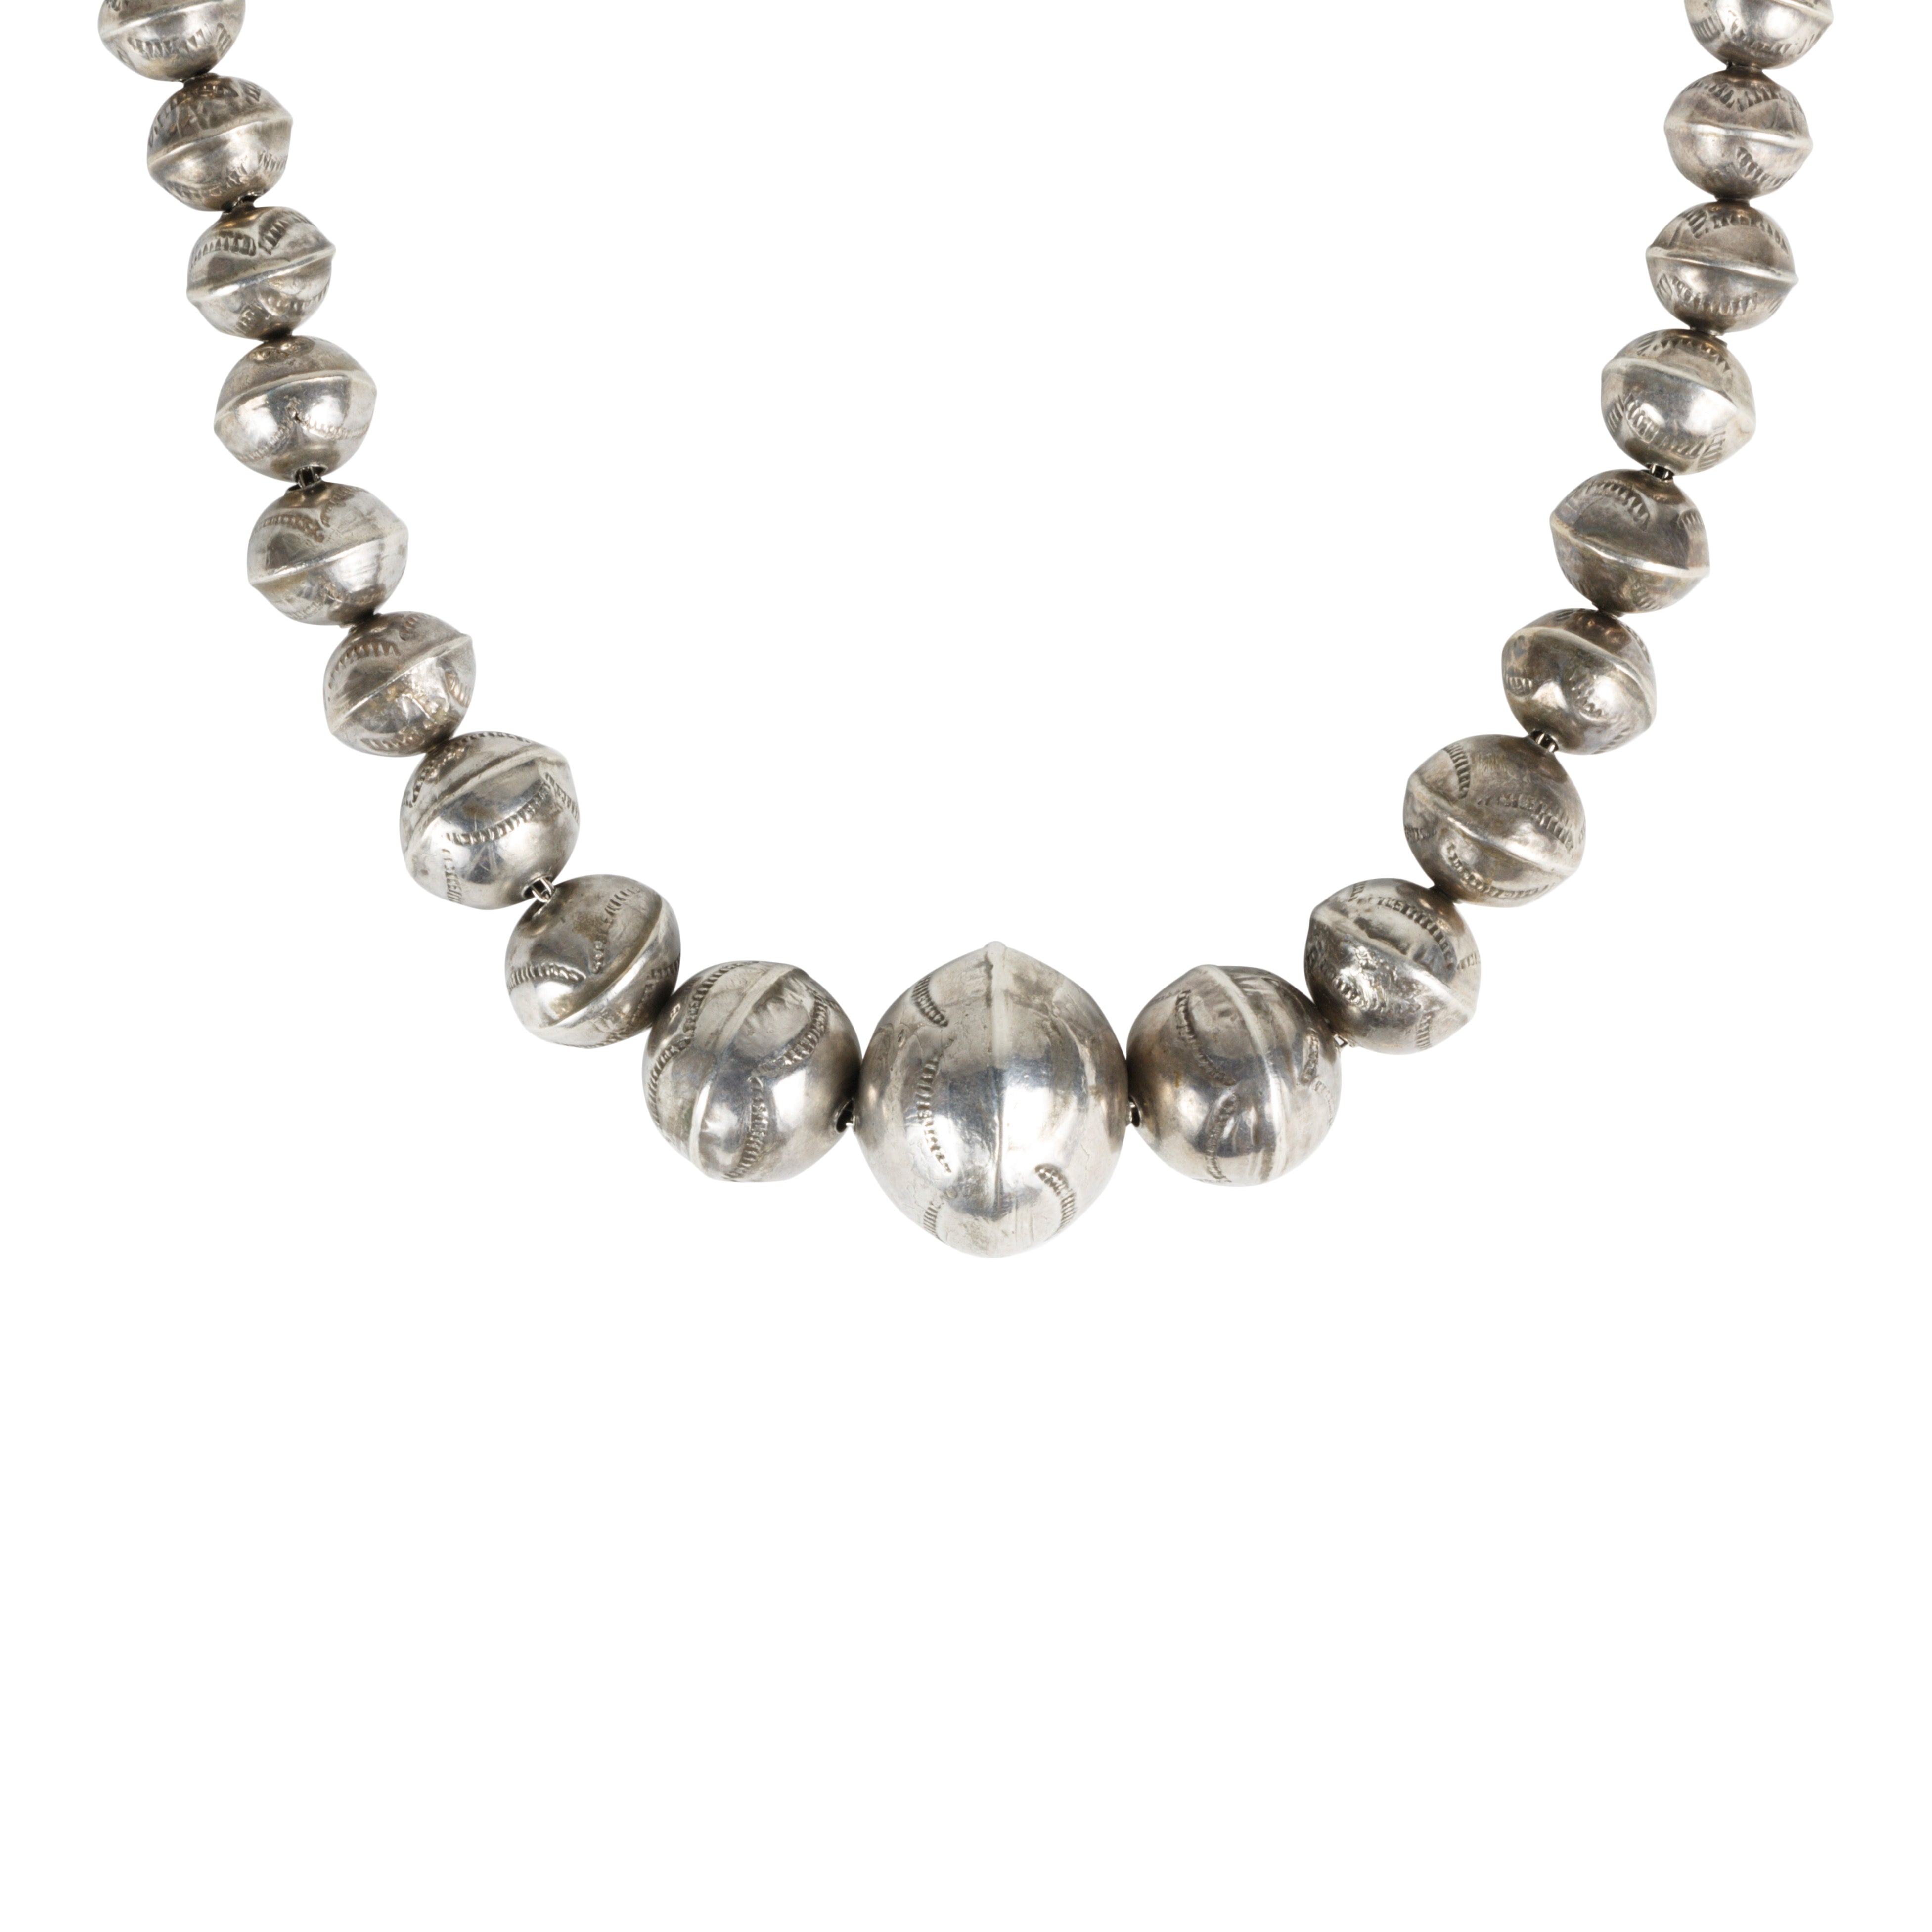 Graduated Sterling Bead Necklace